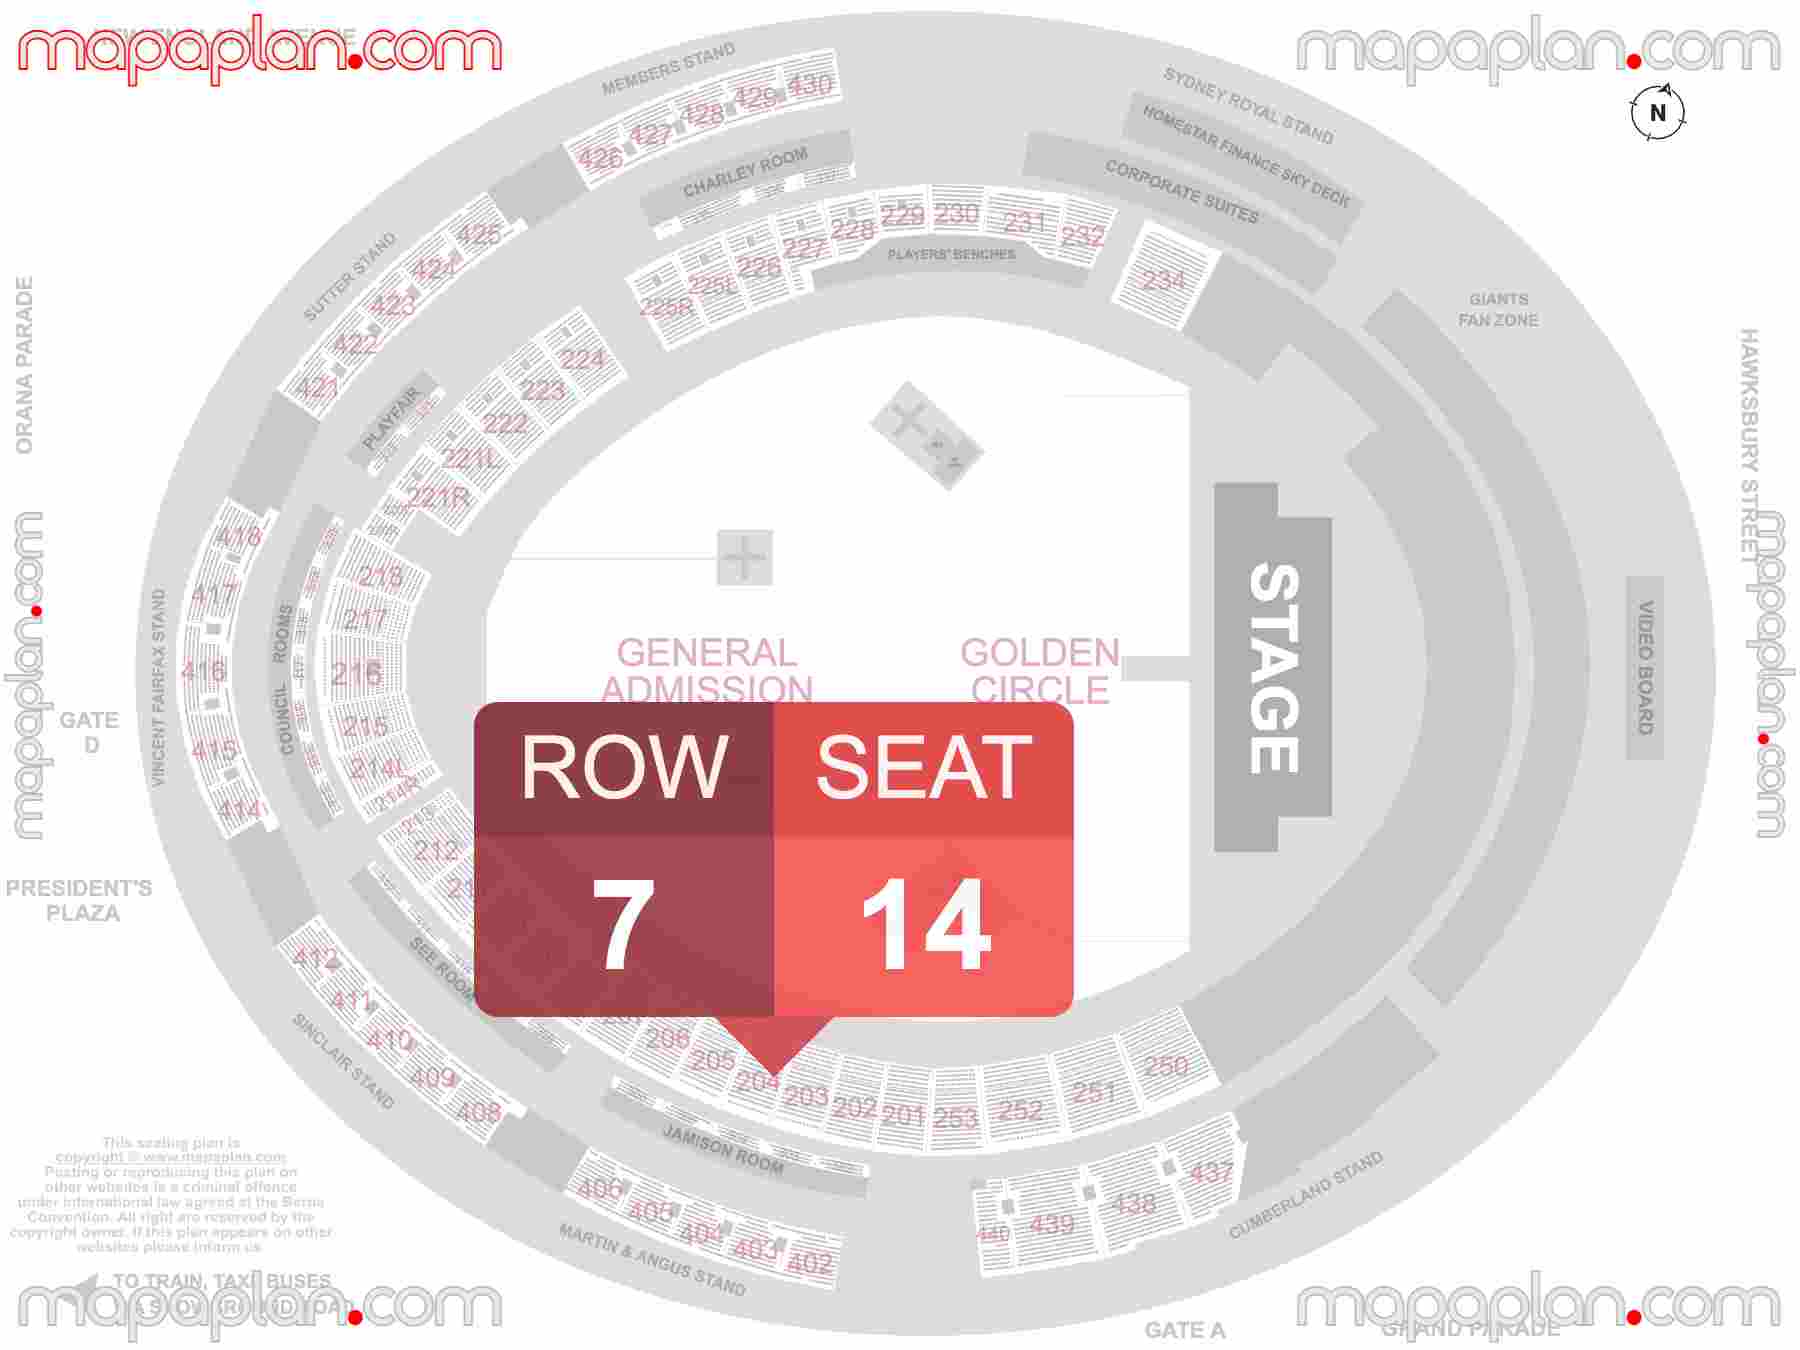 Sydney Showground Engie Stadium seating map Concert with floor general admission standing inside capacity view arrangement plan - Interactive virtual 3d best seats & rows detailed stadium image configuration layout